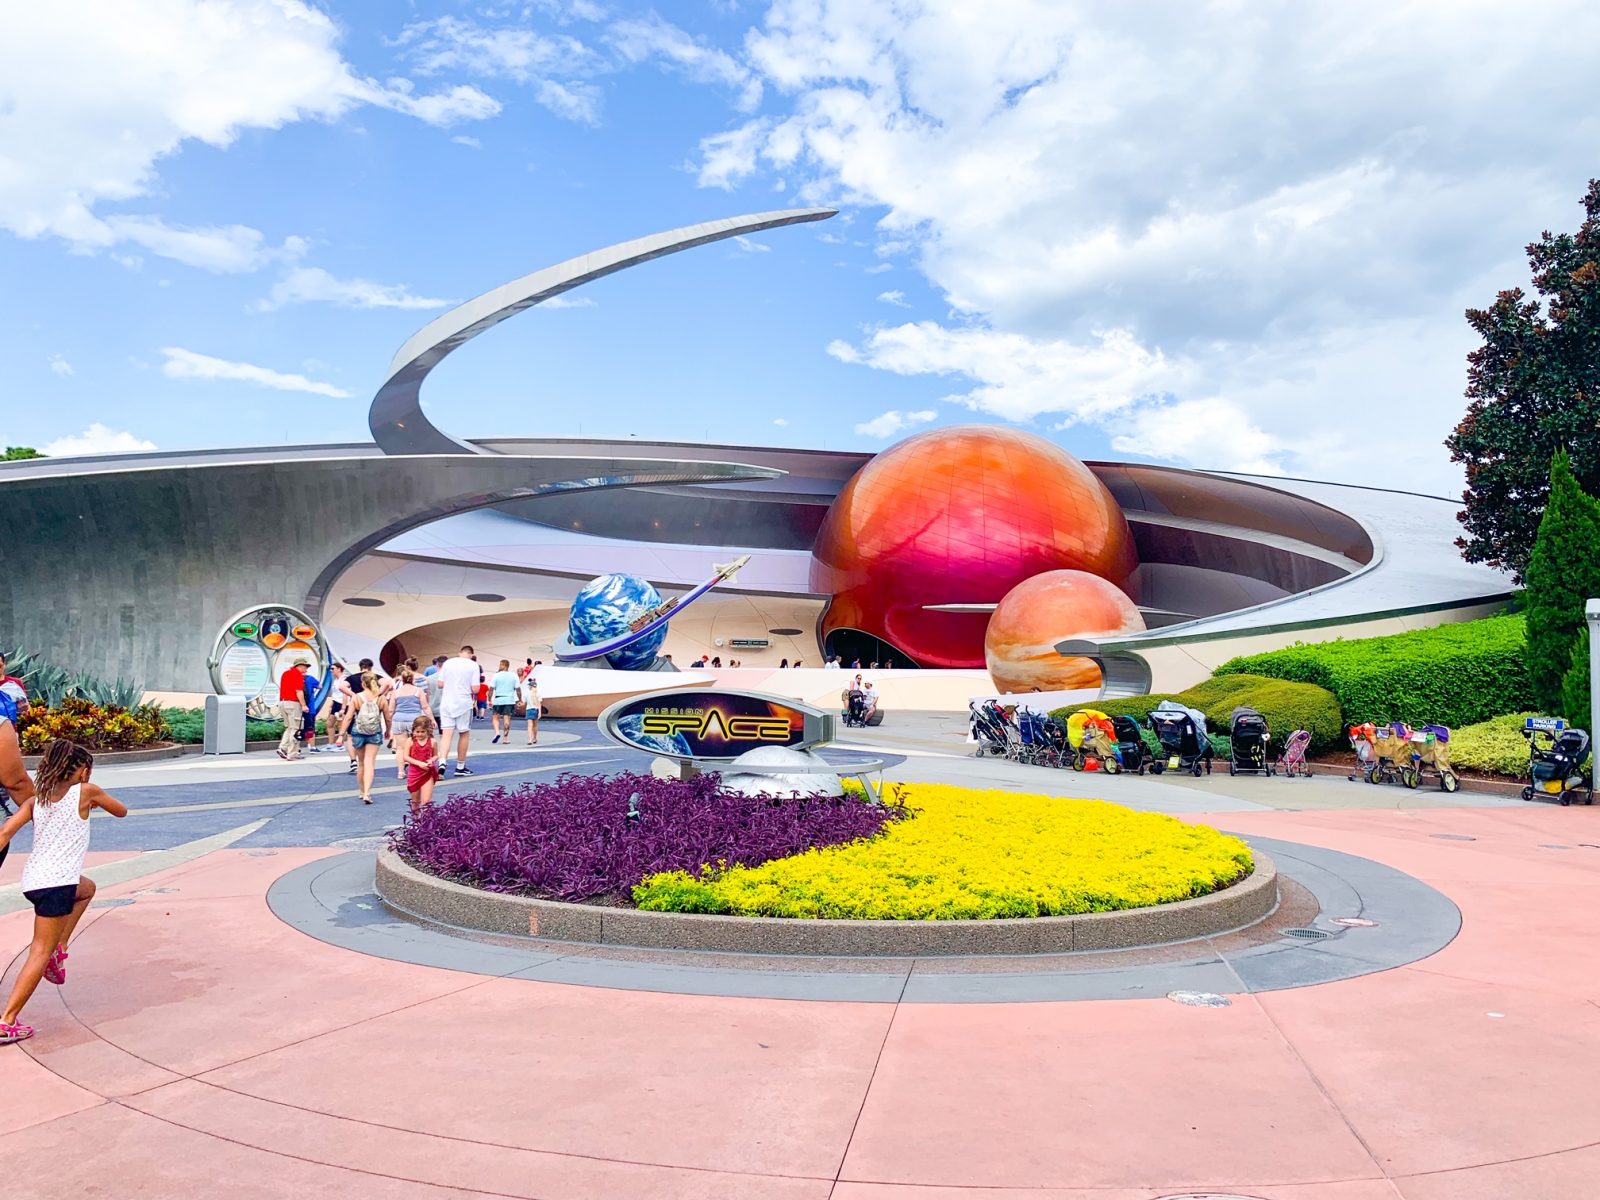 outside view of the entrance to Mission Space